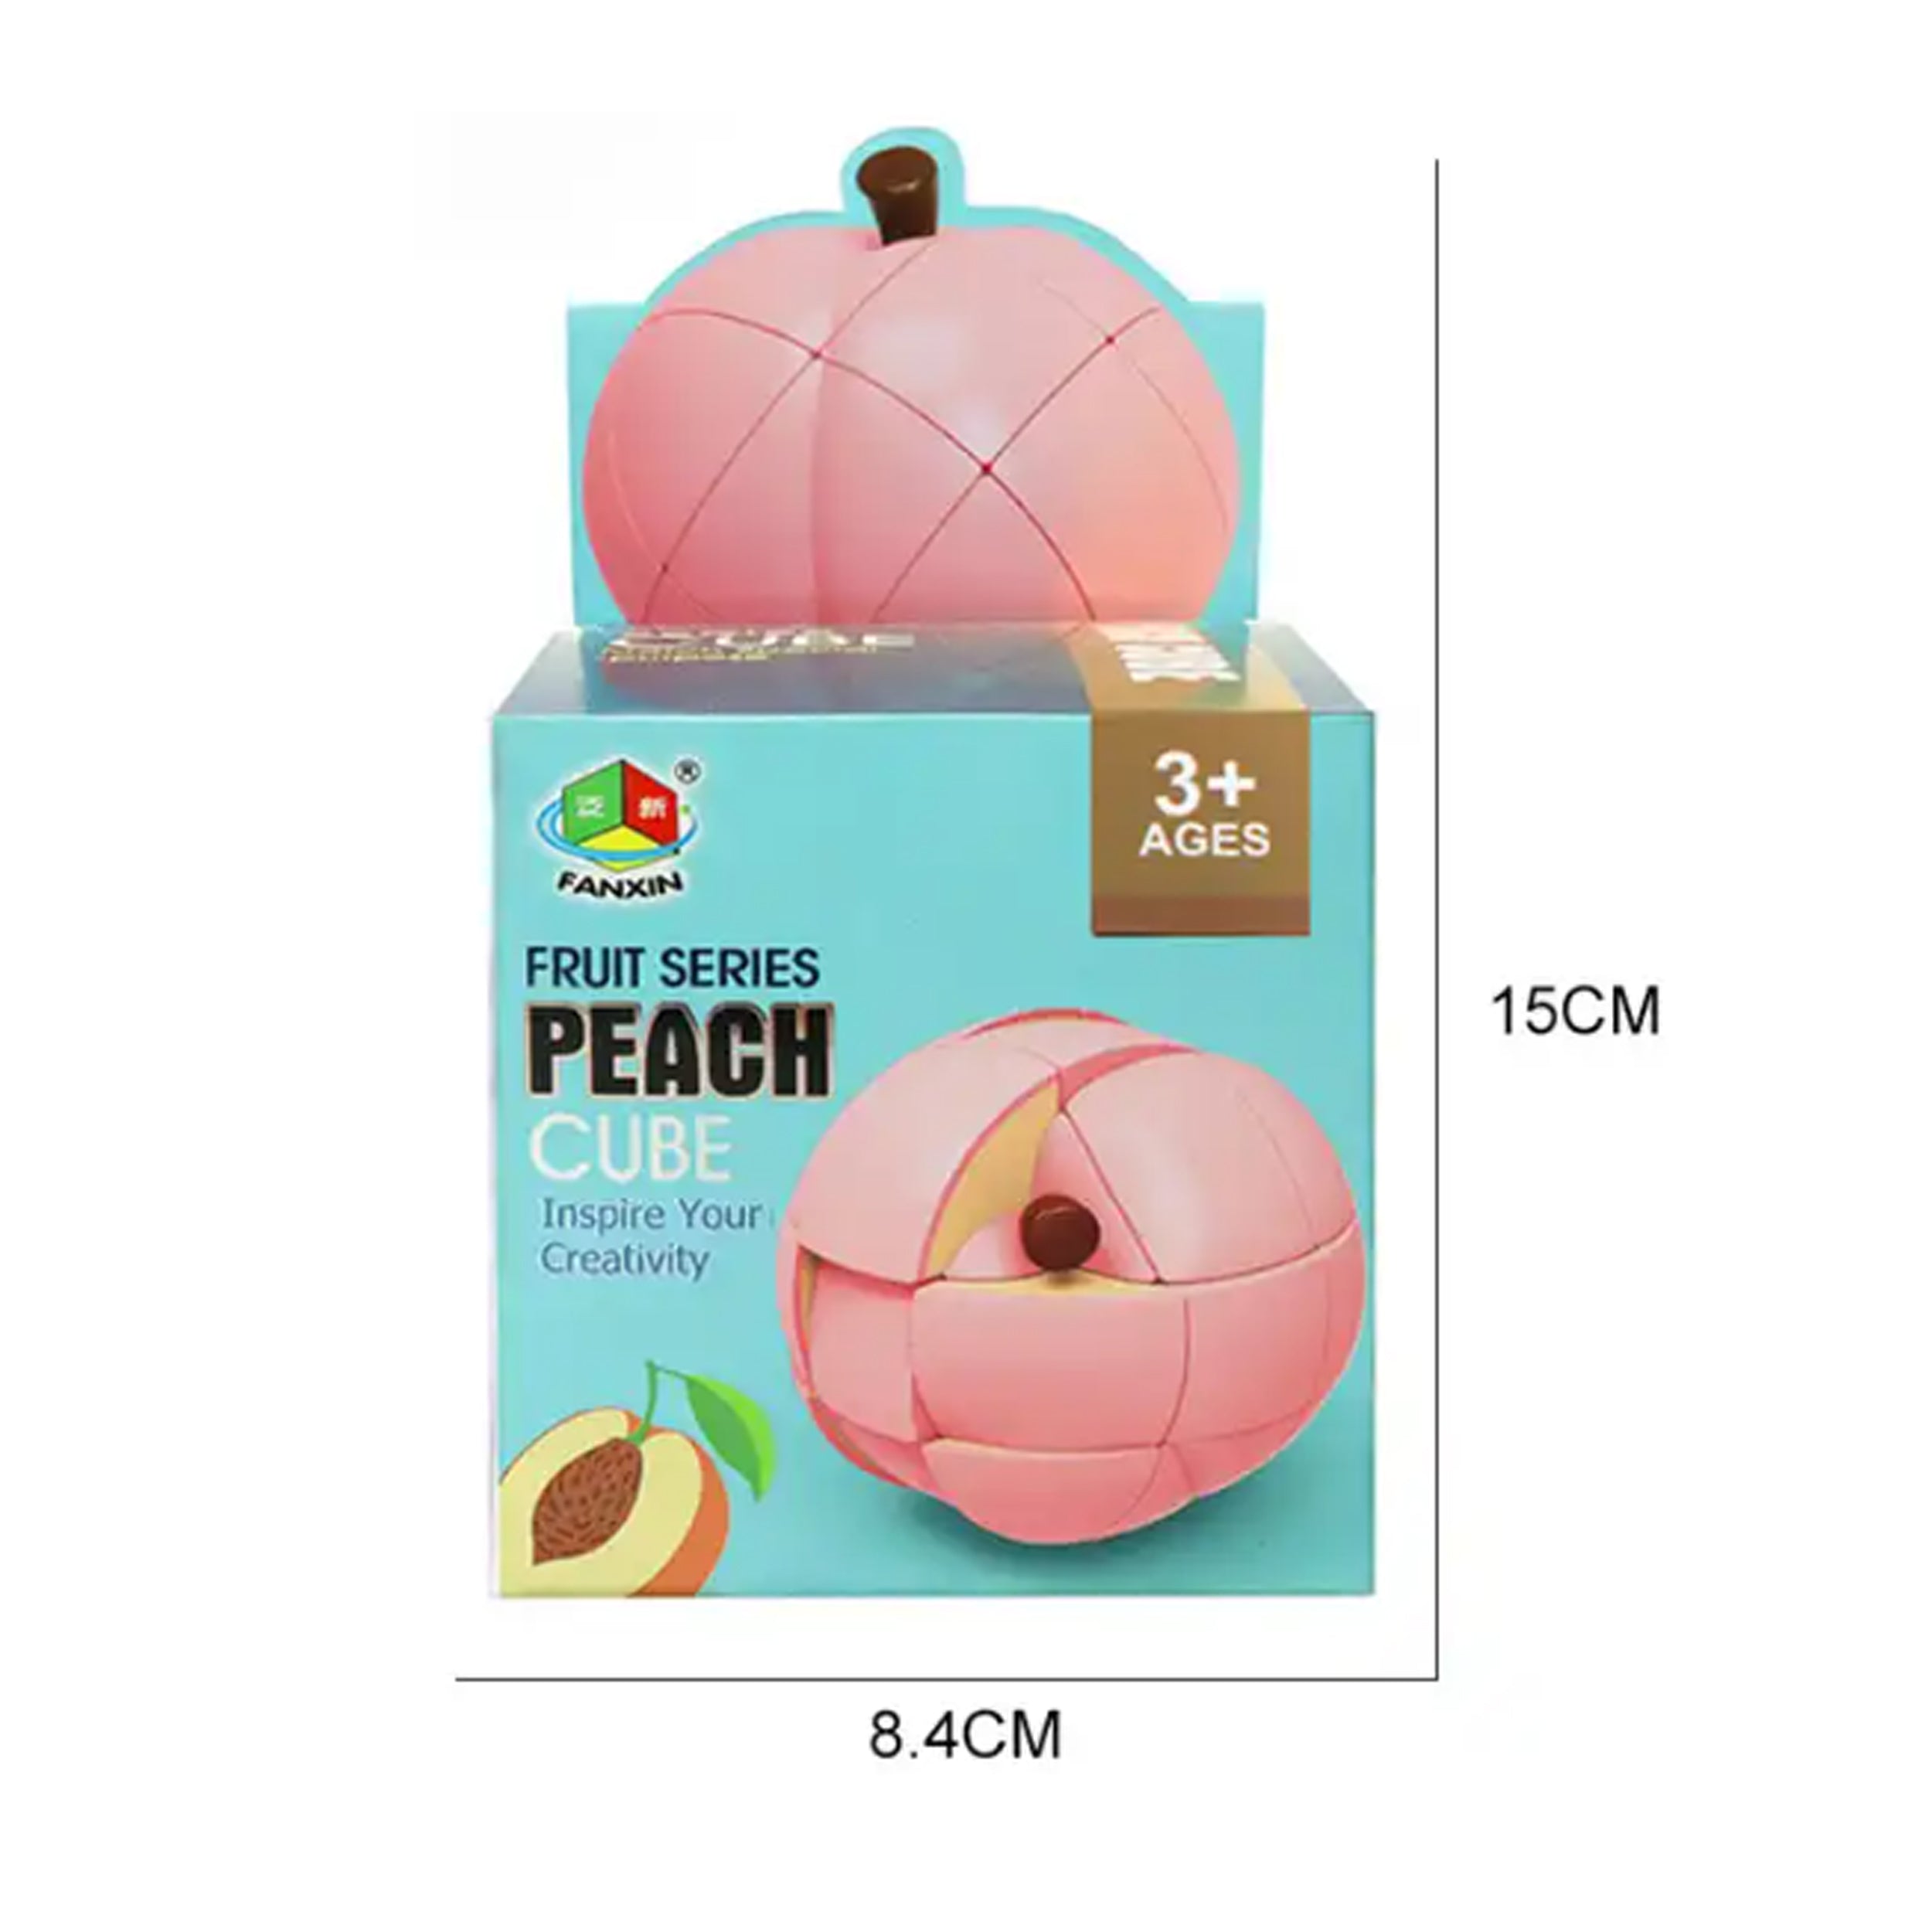 Fruit Magic Cube Set Puzzle Peach Toys - A Fun and Challenging Brain Teaser for Kids and Adults